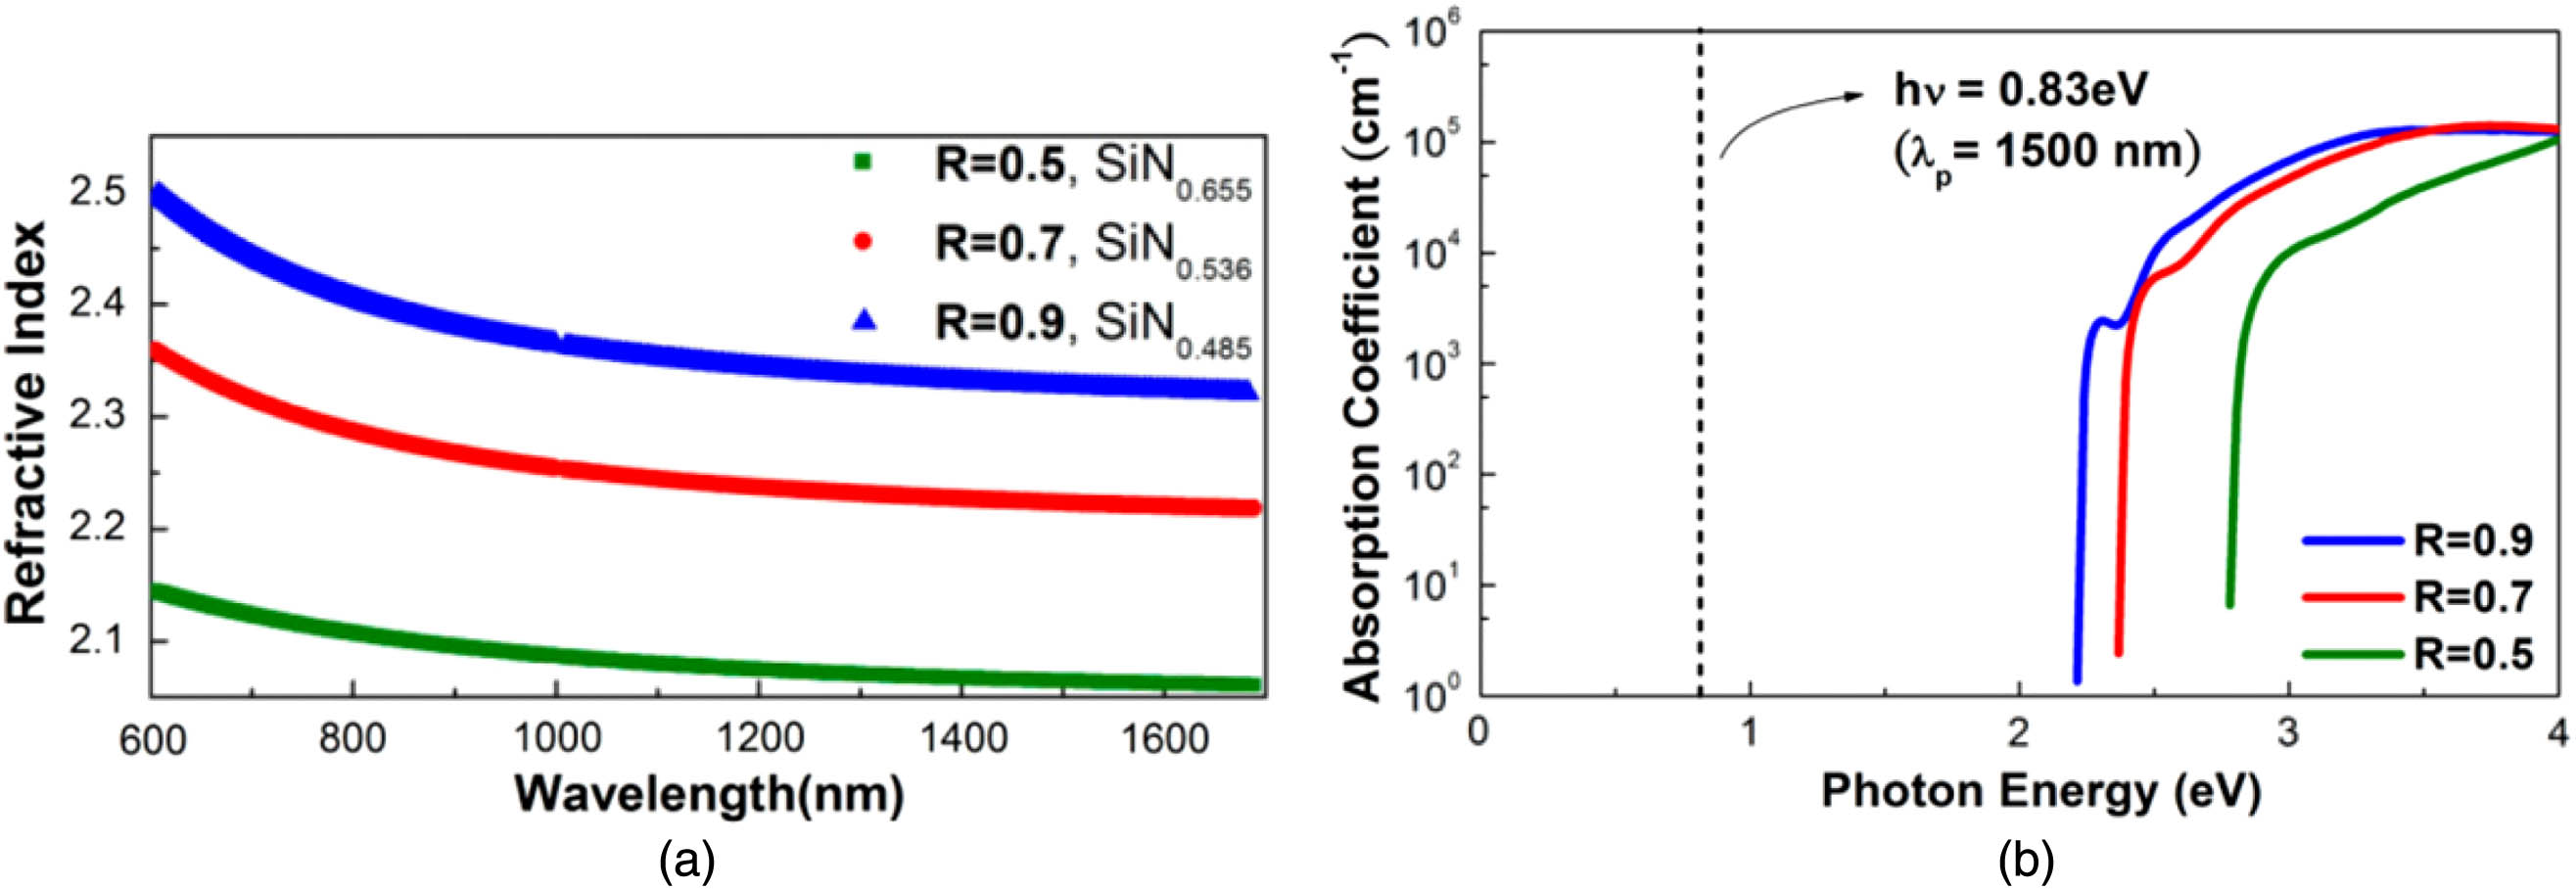 Refractive index tailoring in plasma-enhanced chemical vapor deposited silicon-rich nitride films. (a) Larger ratios of flow rate between SiH4∶NH3 precursor gases result in larger refractive indices. (b) Redshifting of the linear absorption band edge as a function of SiH4∶NH3 flow rate ratio. From Ref. [21].